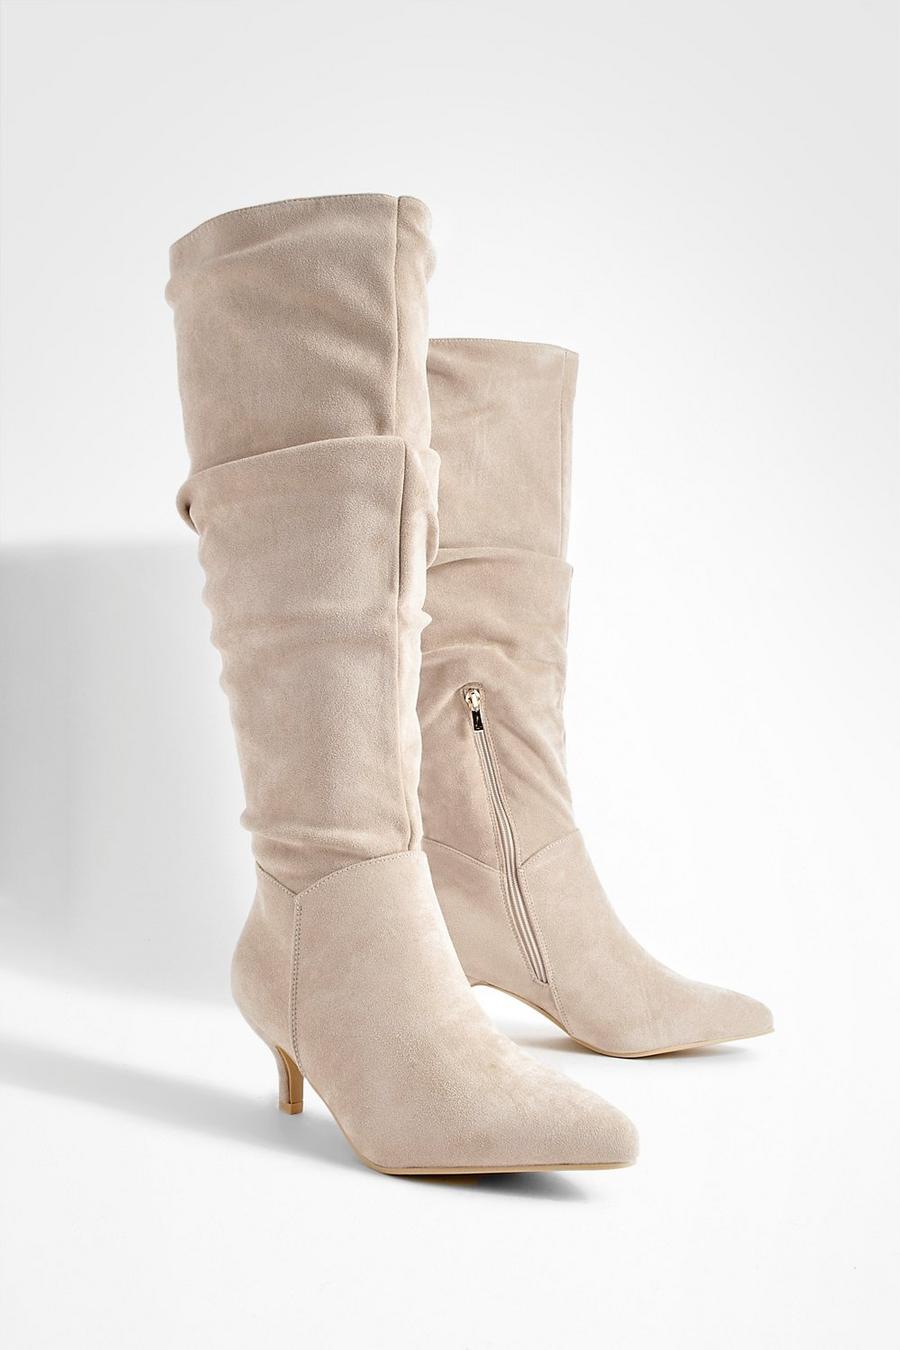 Stone beige Low Stiletto Knee High Slouchy Boots